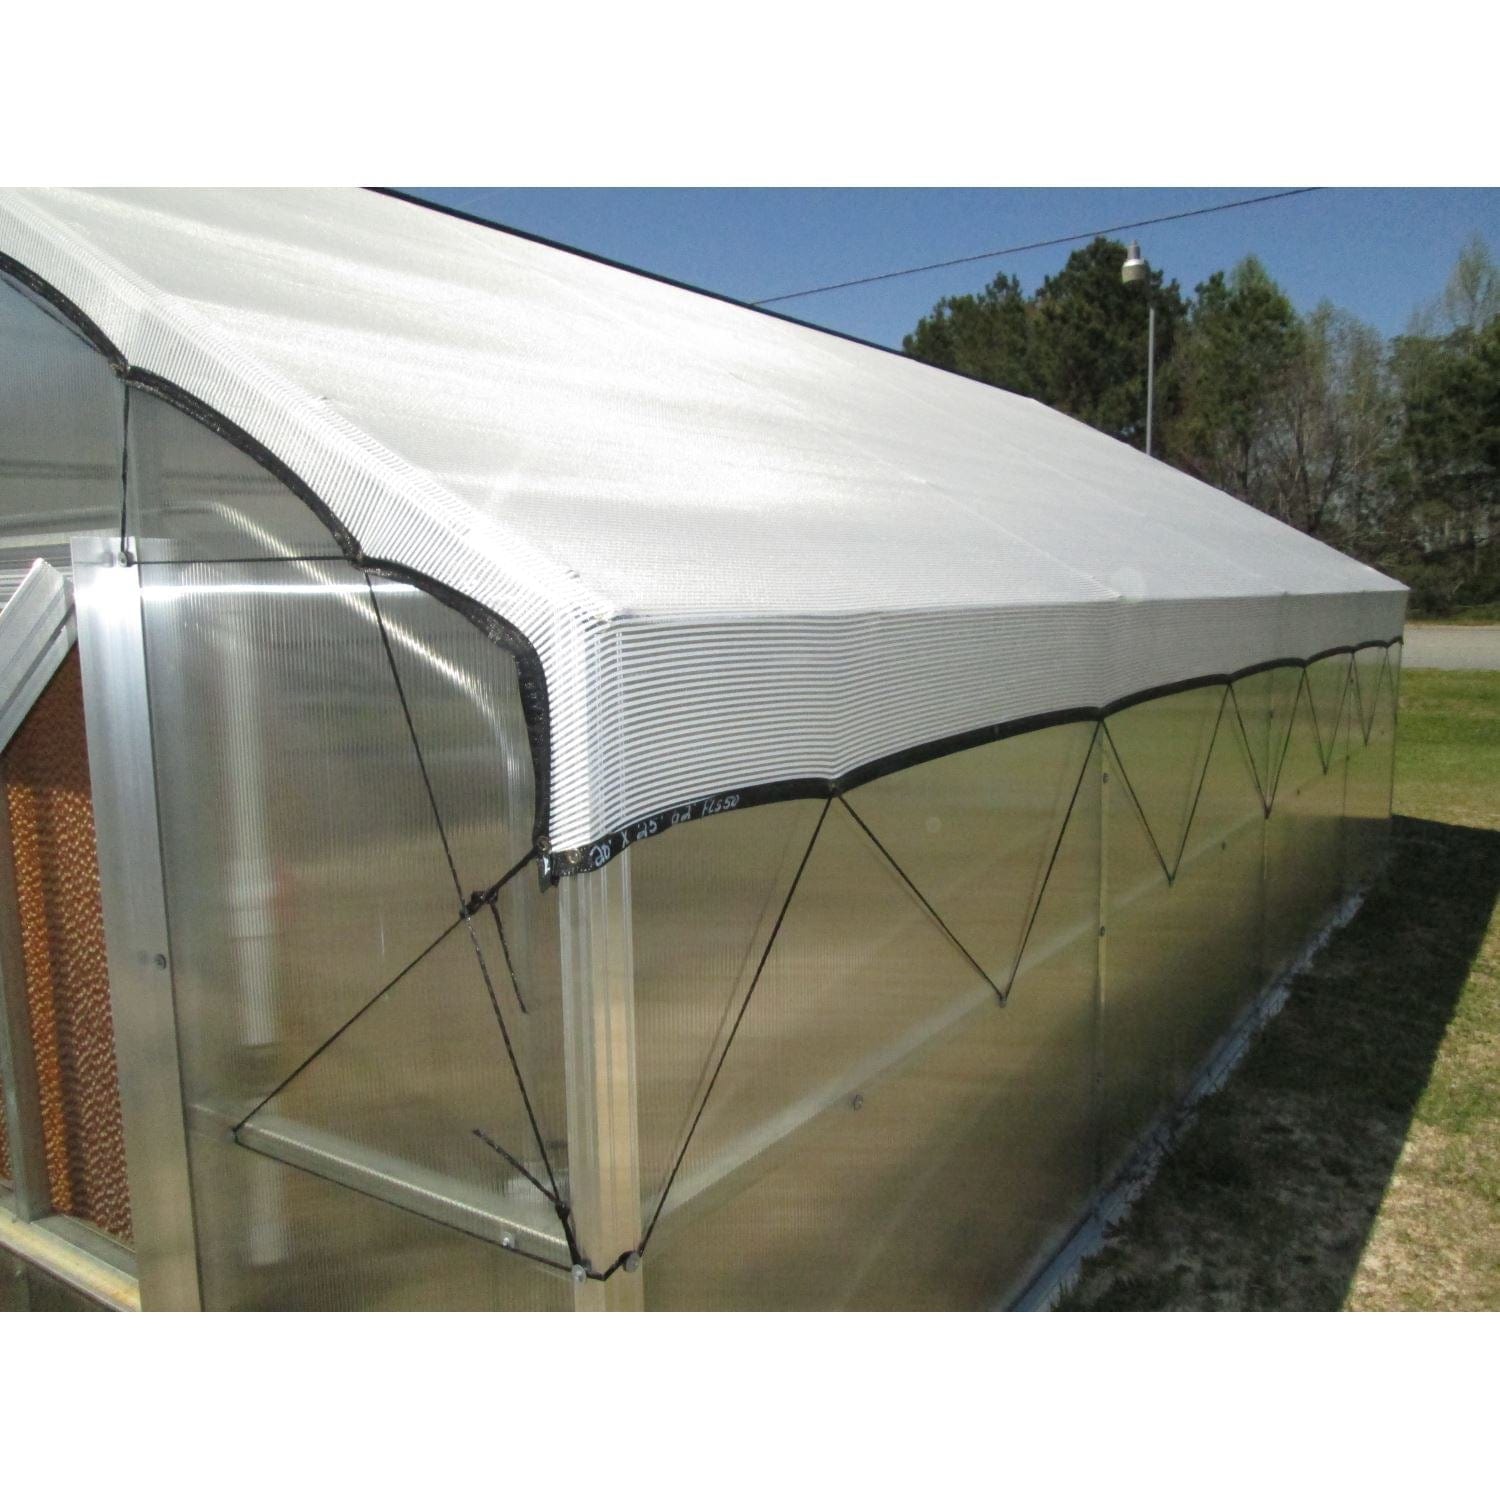 Riverstone Industries Deluxe Greenhouse Kit Riverstone | Thoreau - Premium Grower's Edition - 12FT x 24FT Educational Greenhouse Kit With 6FT High Walls R12246-PG